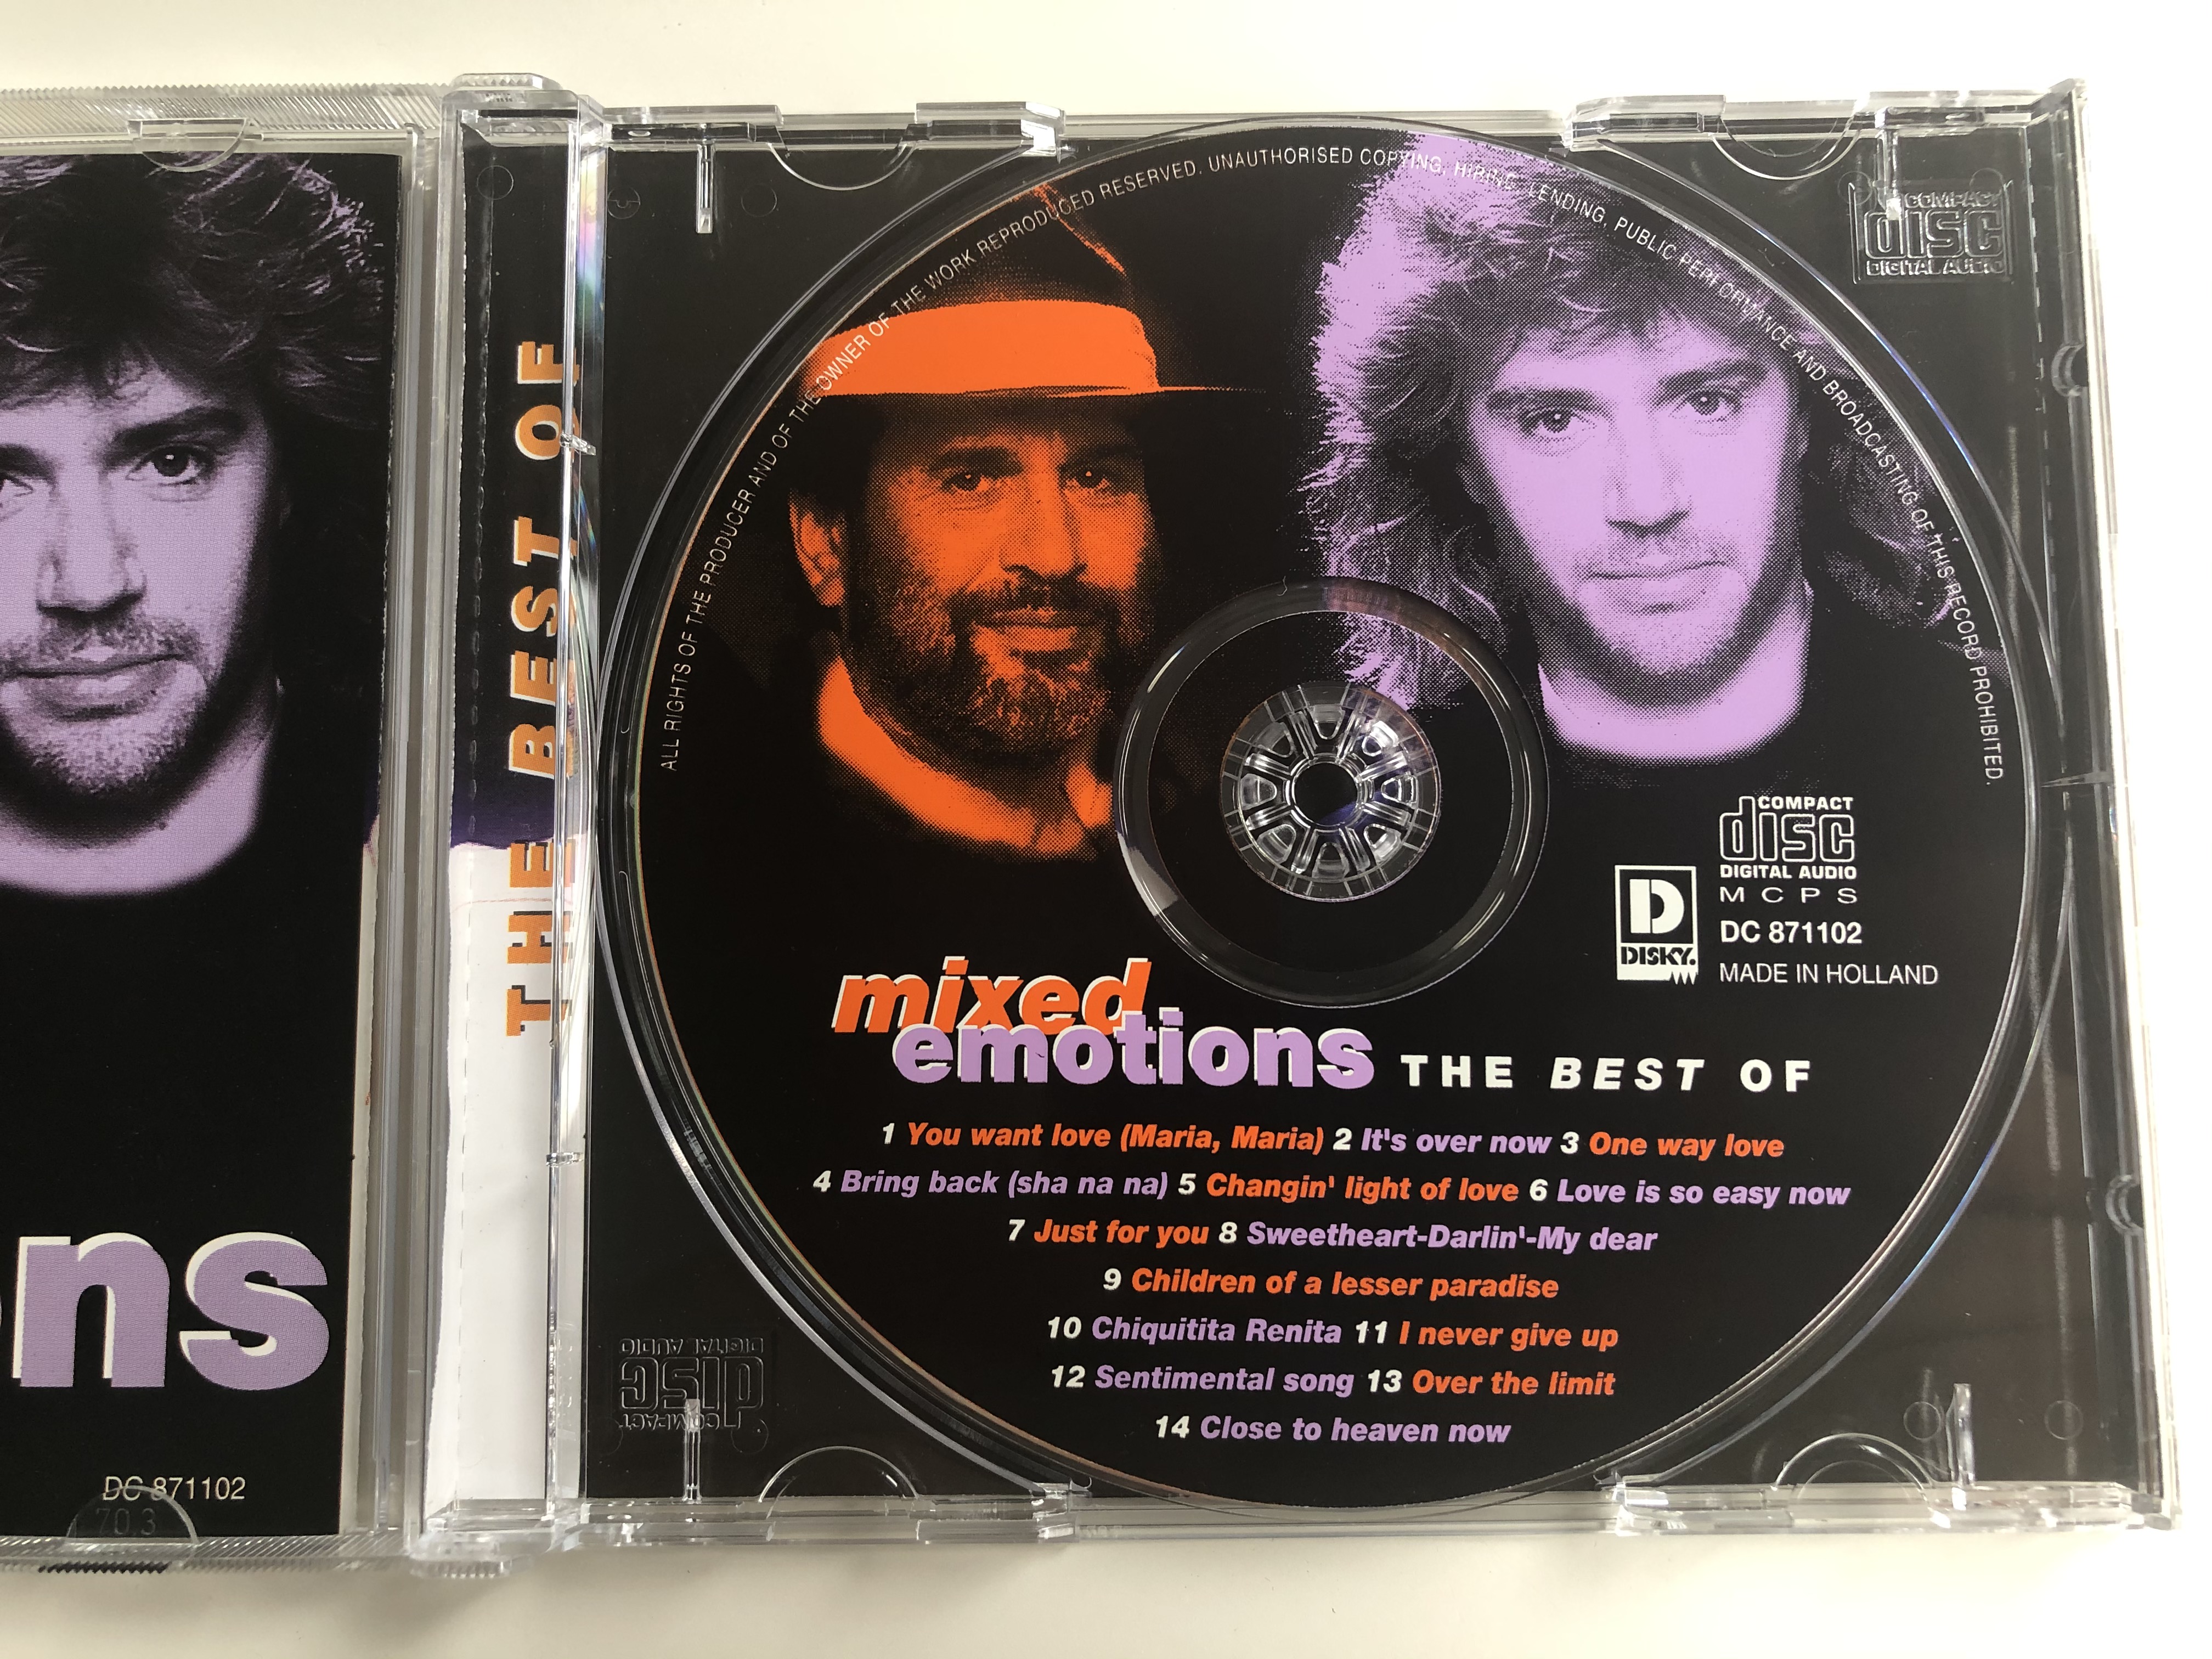 mixed-emotions-the-best-of-it-s-over-now-one-way-love-just-for-you-i-never-give-up-sentimental-song-over-the-limit-disky-audio-cd-1996-dc-871102-3-.jpg